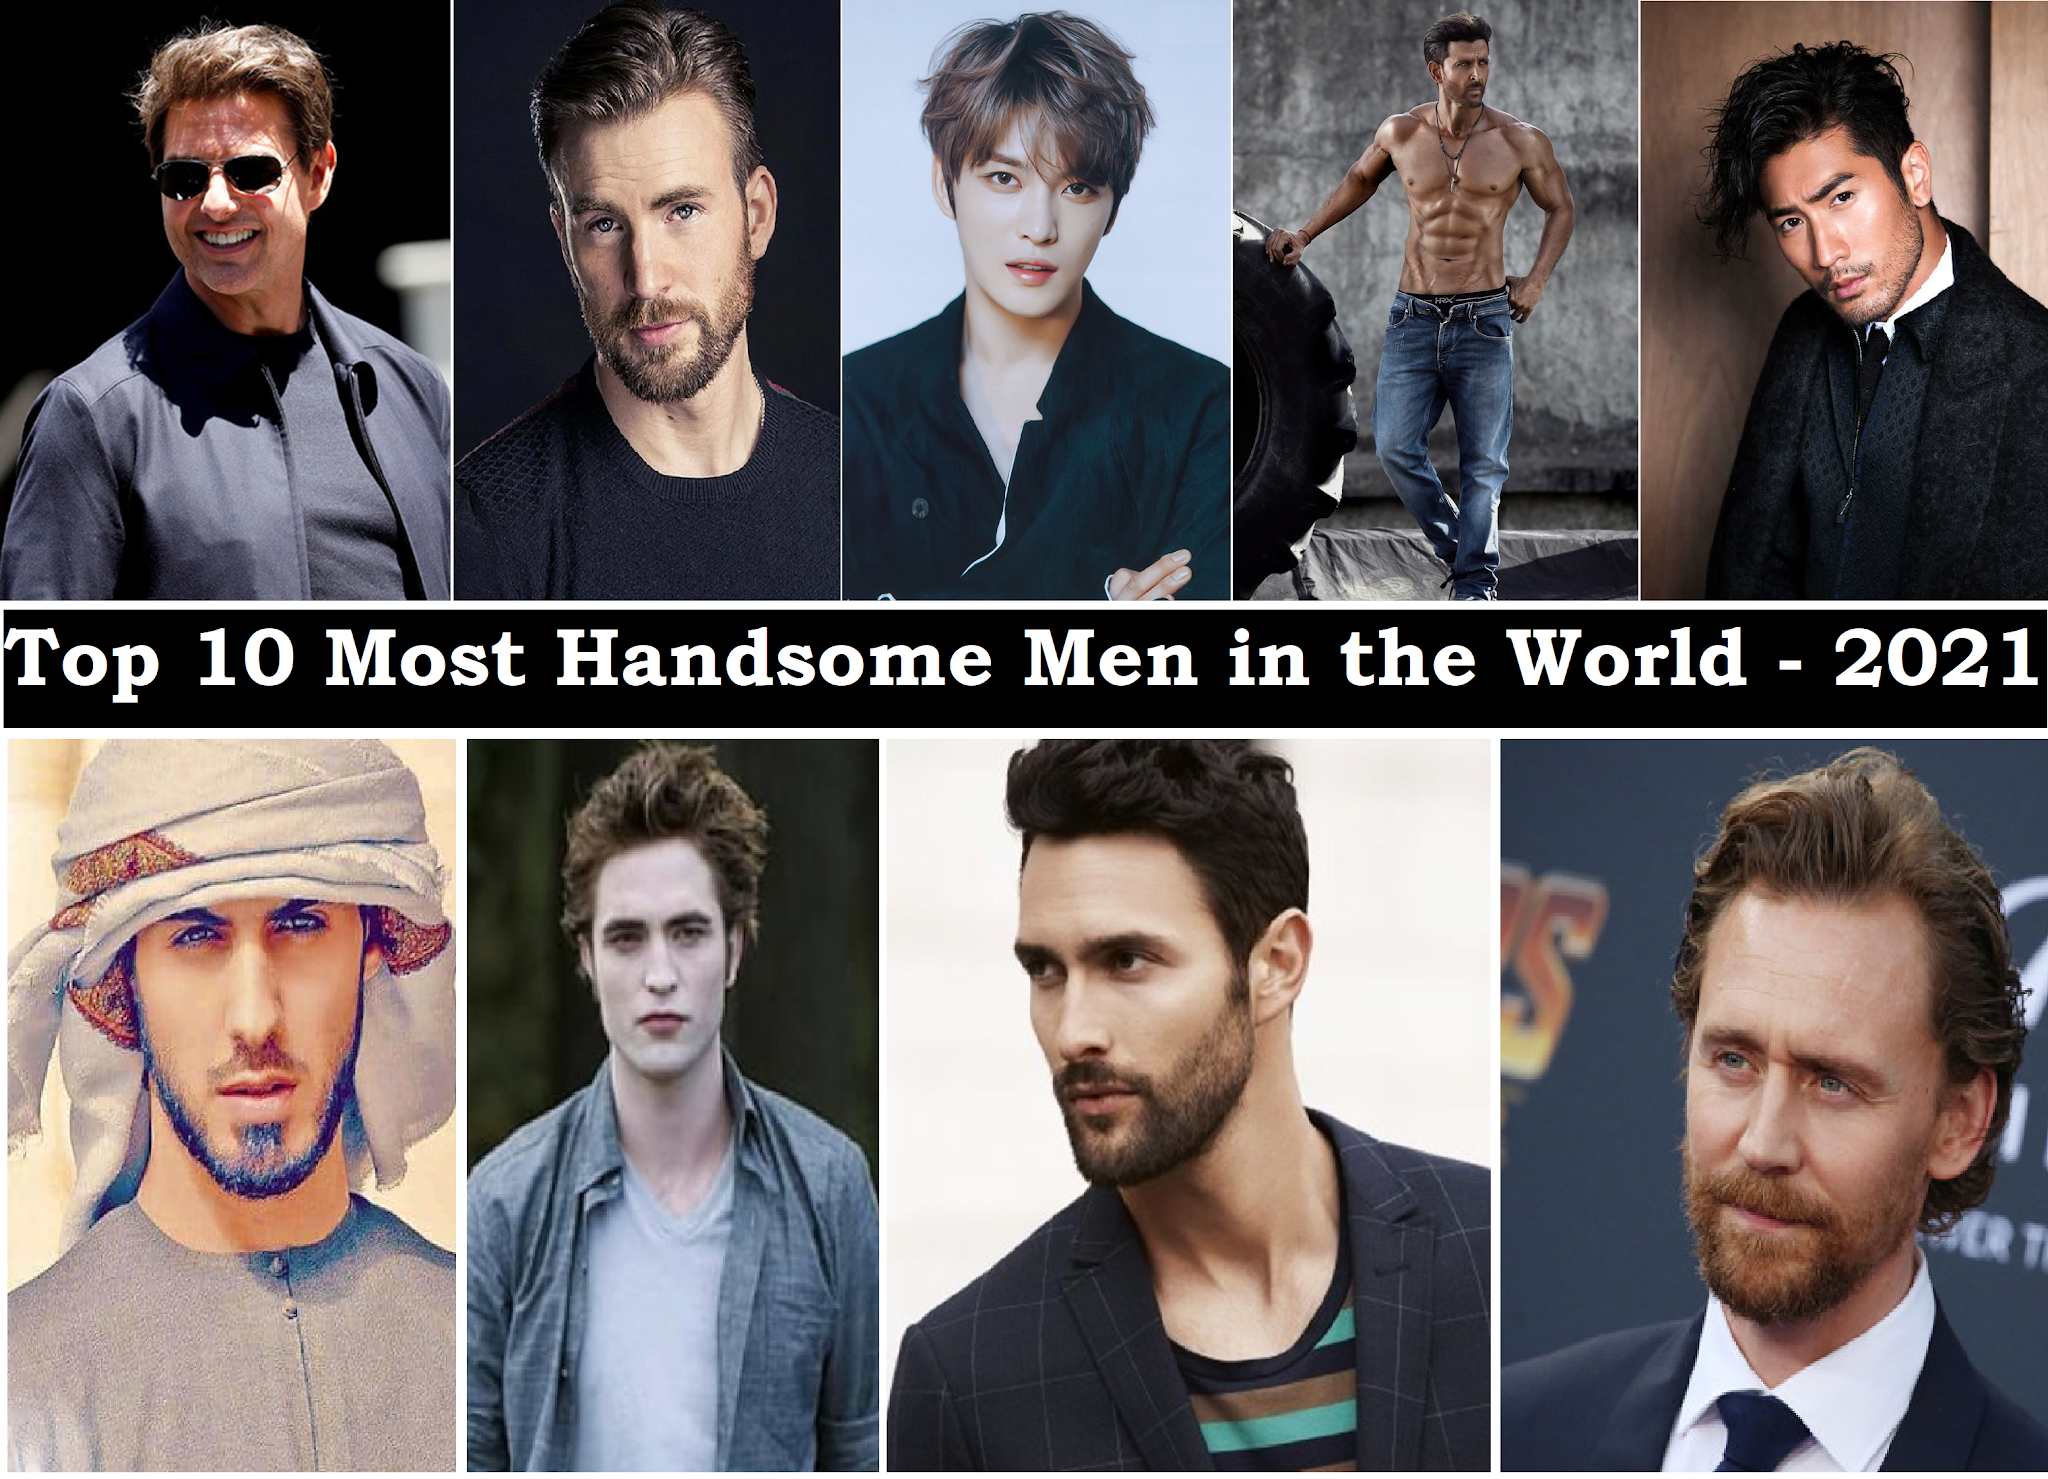 The best man in the world. Most handsome man 2021. The most handsome man in the World 2021. Most handsome man in the World 2022. Who is the most handsome man in the World.